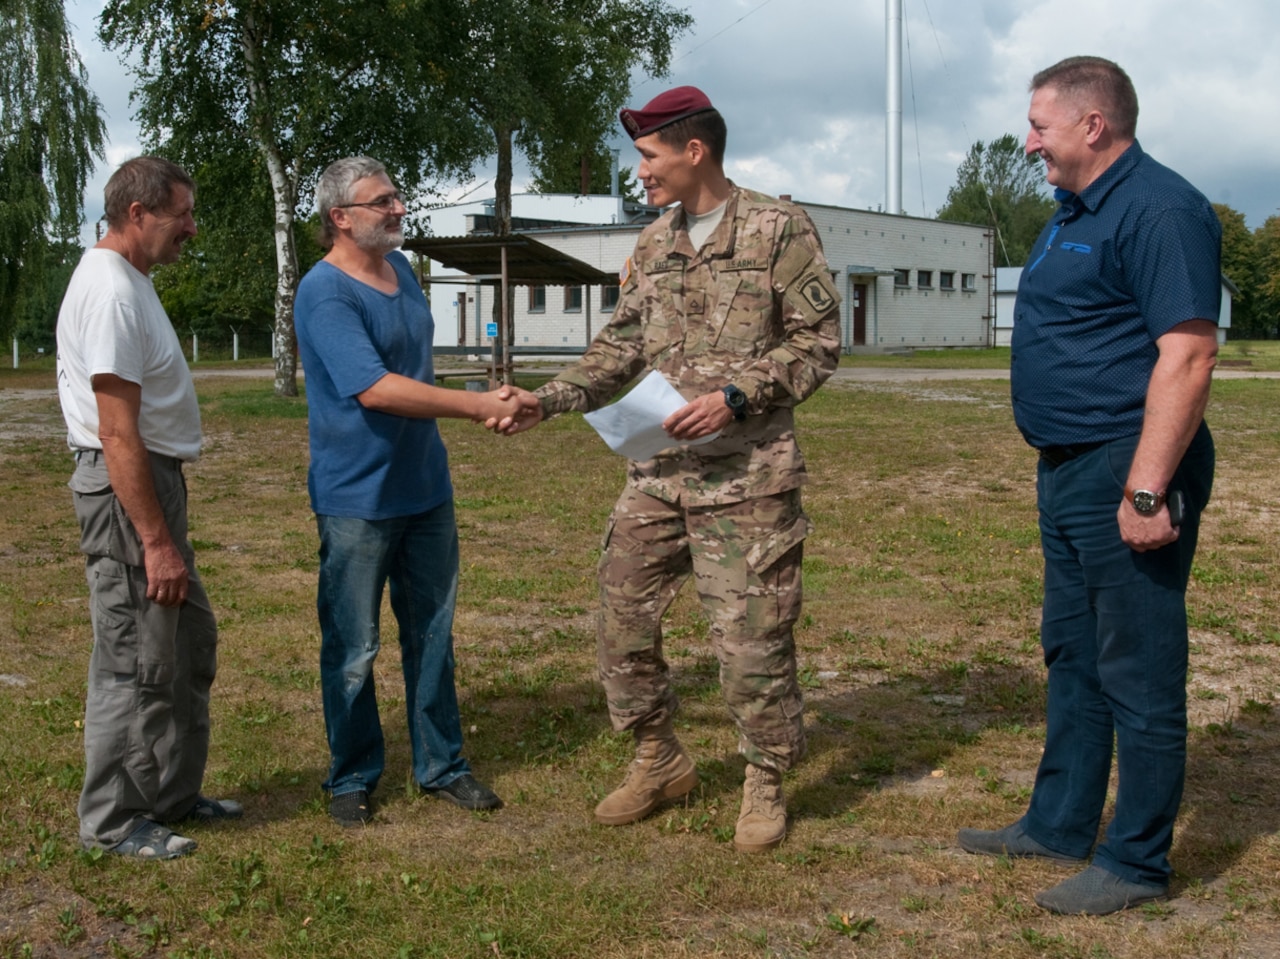 U.S. Army Pfc. Aidarbek Raev, a unit supply specialist with Dog Company, 1st Battalion, 503rd Infantry Regiment, talks with military contractors about a construction project in Panevezys, Lithuania, Aug. 26, 2015. Raev, a native of Bishkek, Kyrgyzstan, is fluent in Russian, the second-most common language in Lithuania. Raev’s language skills helped ease communication barriers between U.S. soldiers and host nation allies. U.S. Army photo by Sgt. Jarred Woods